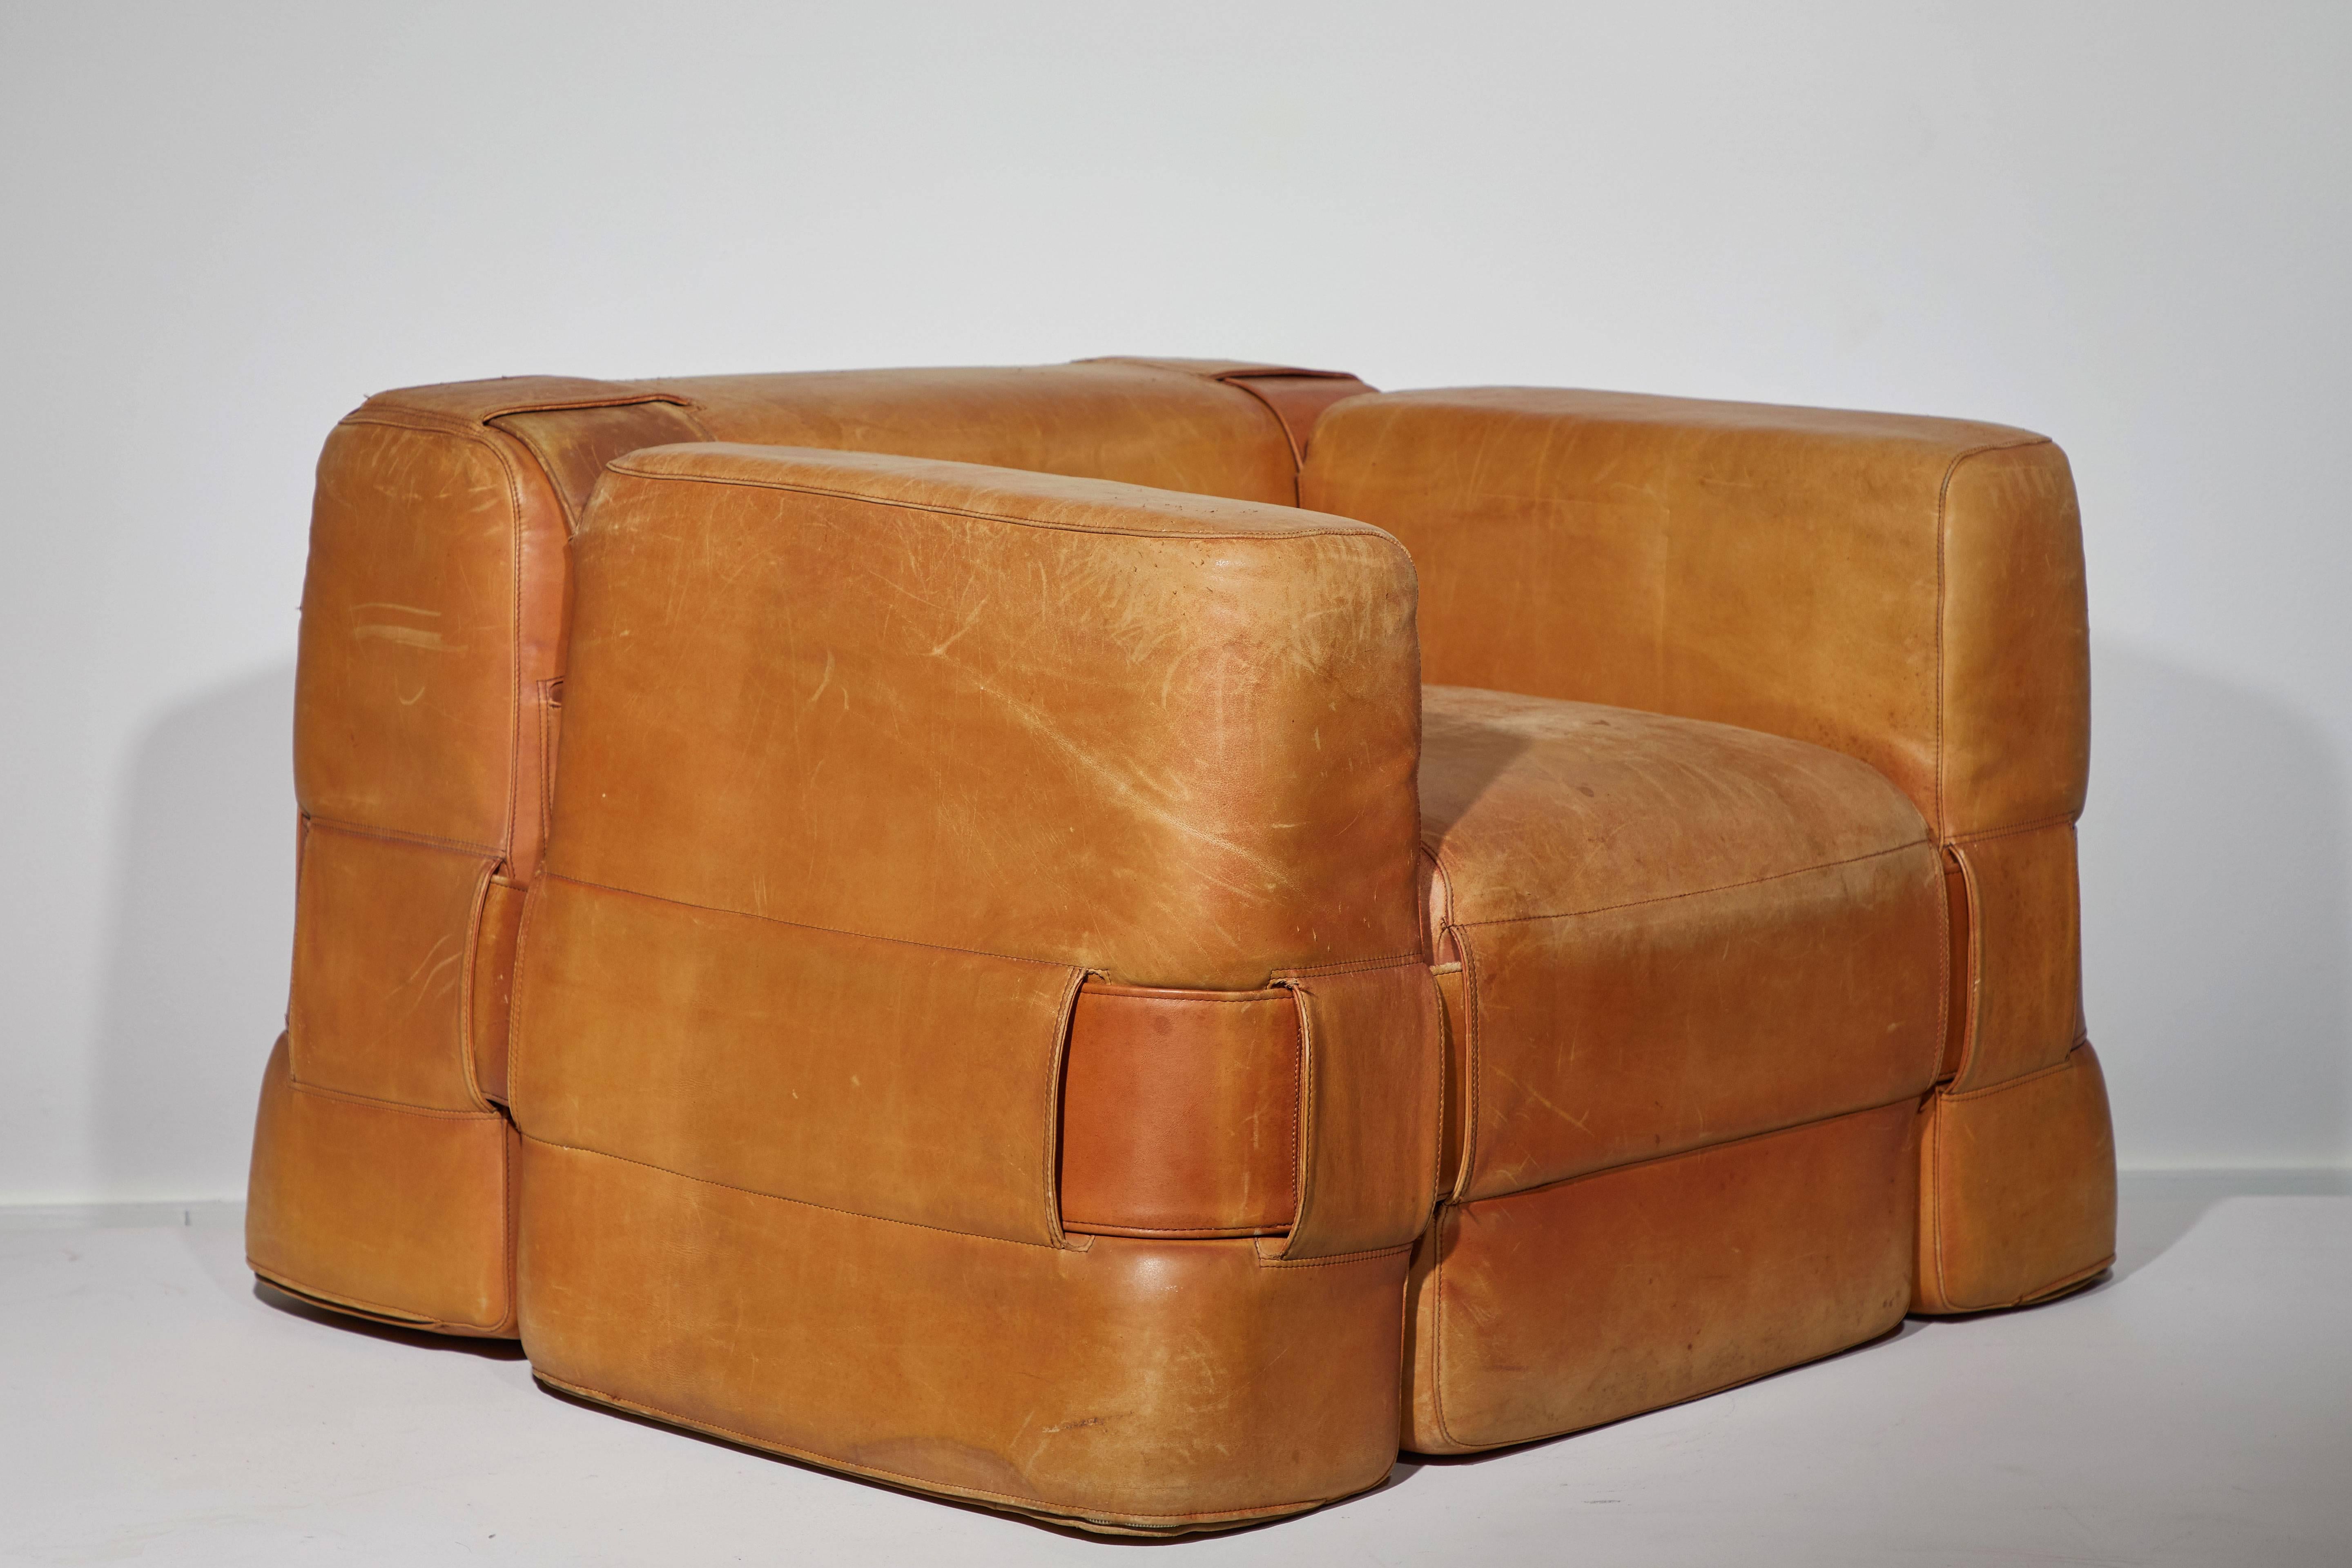 Patinated leather 932 armchair by Mario Bellini for Cassina. Made in Italy, circa 1965. 

Sofa also available in separate posting.

"The iconic Le Grand comfort armchair designed by Le Corbusier inspired Bellini to reject on the new